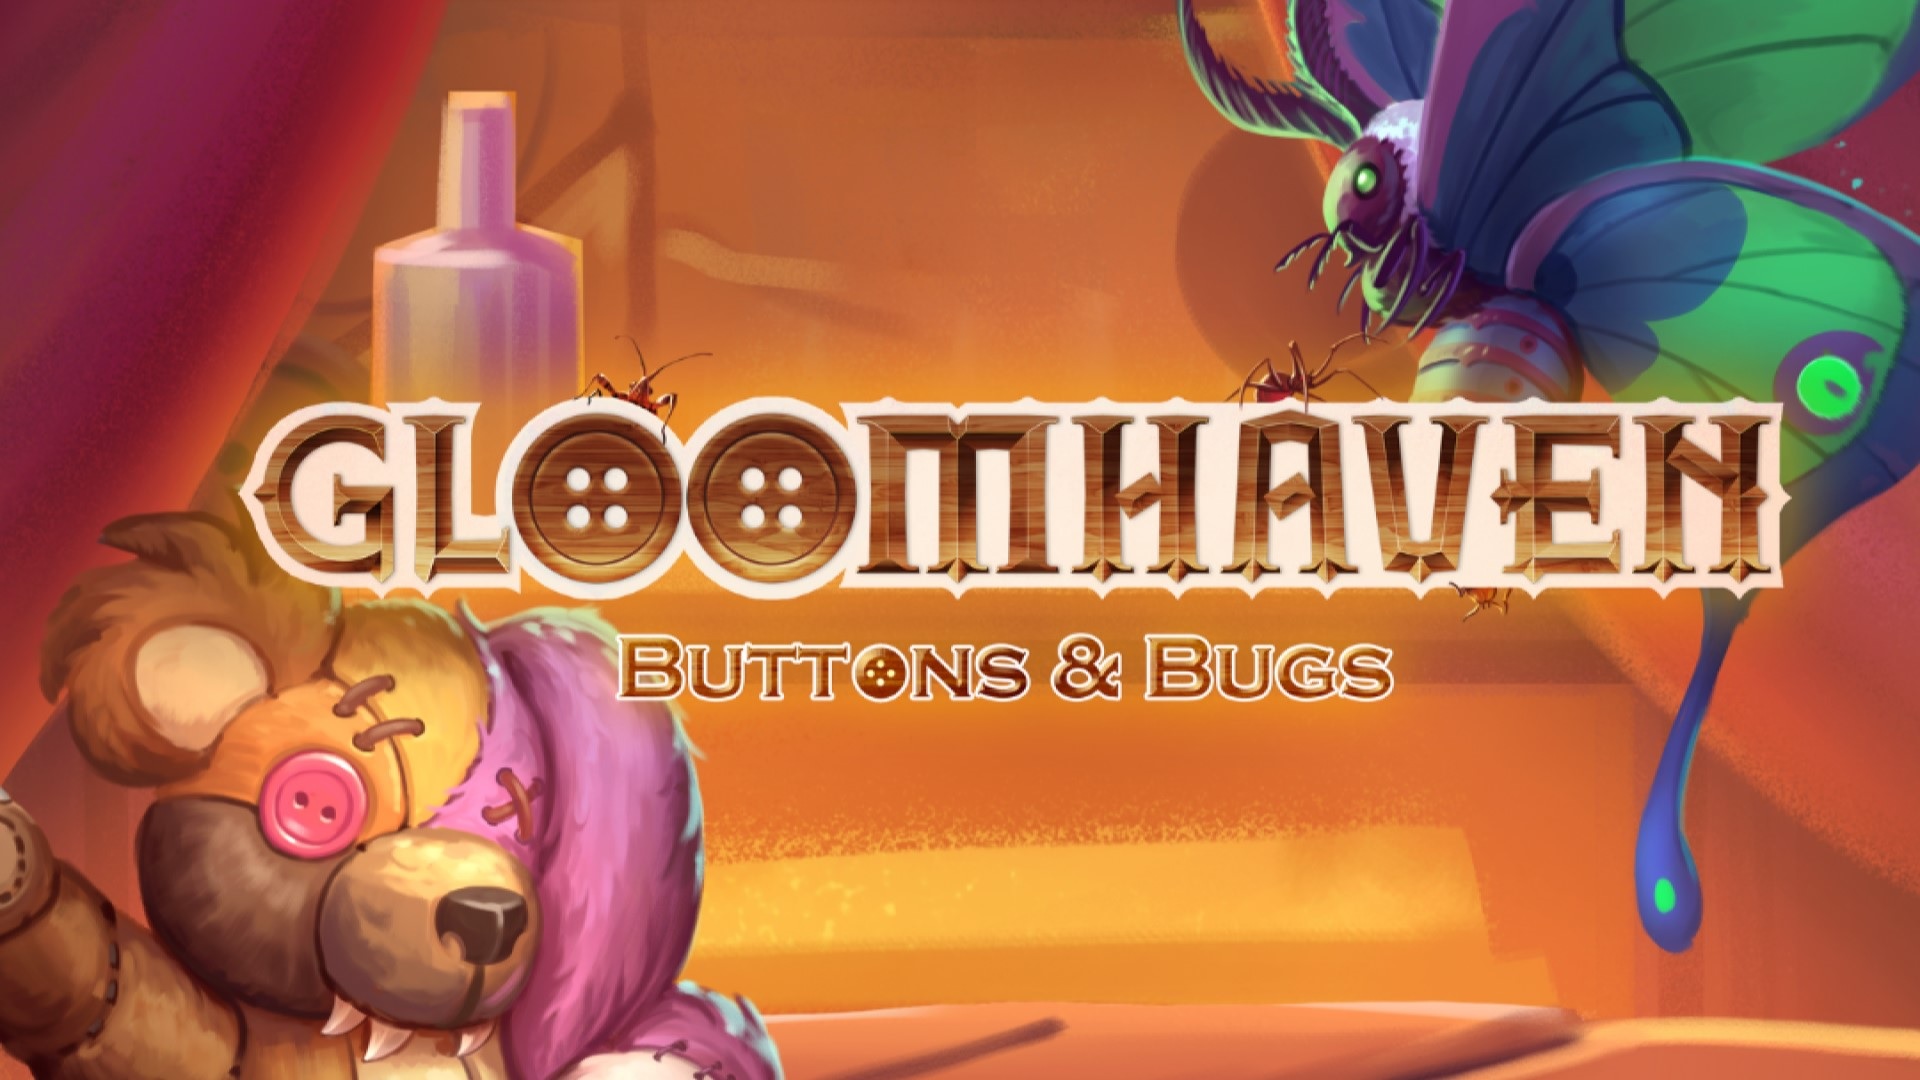 Gloomhaven: Buttons & Bugs